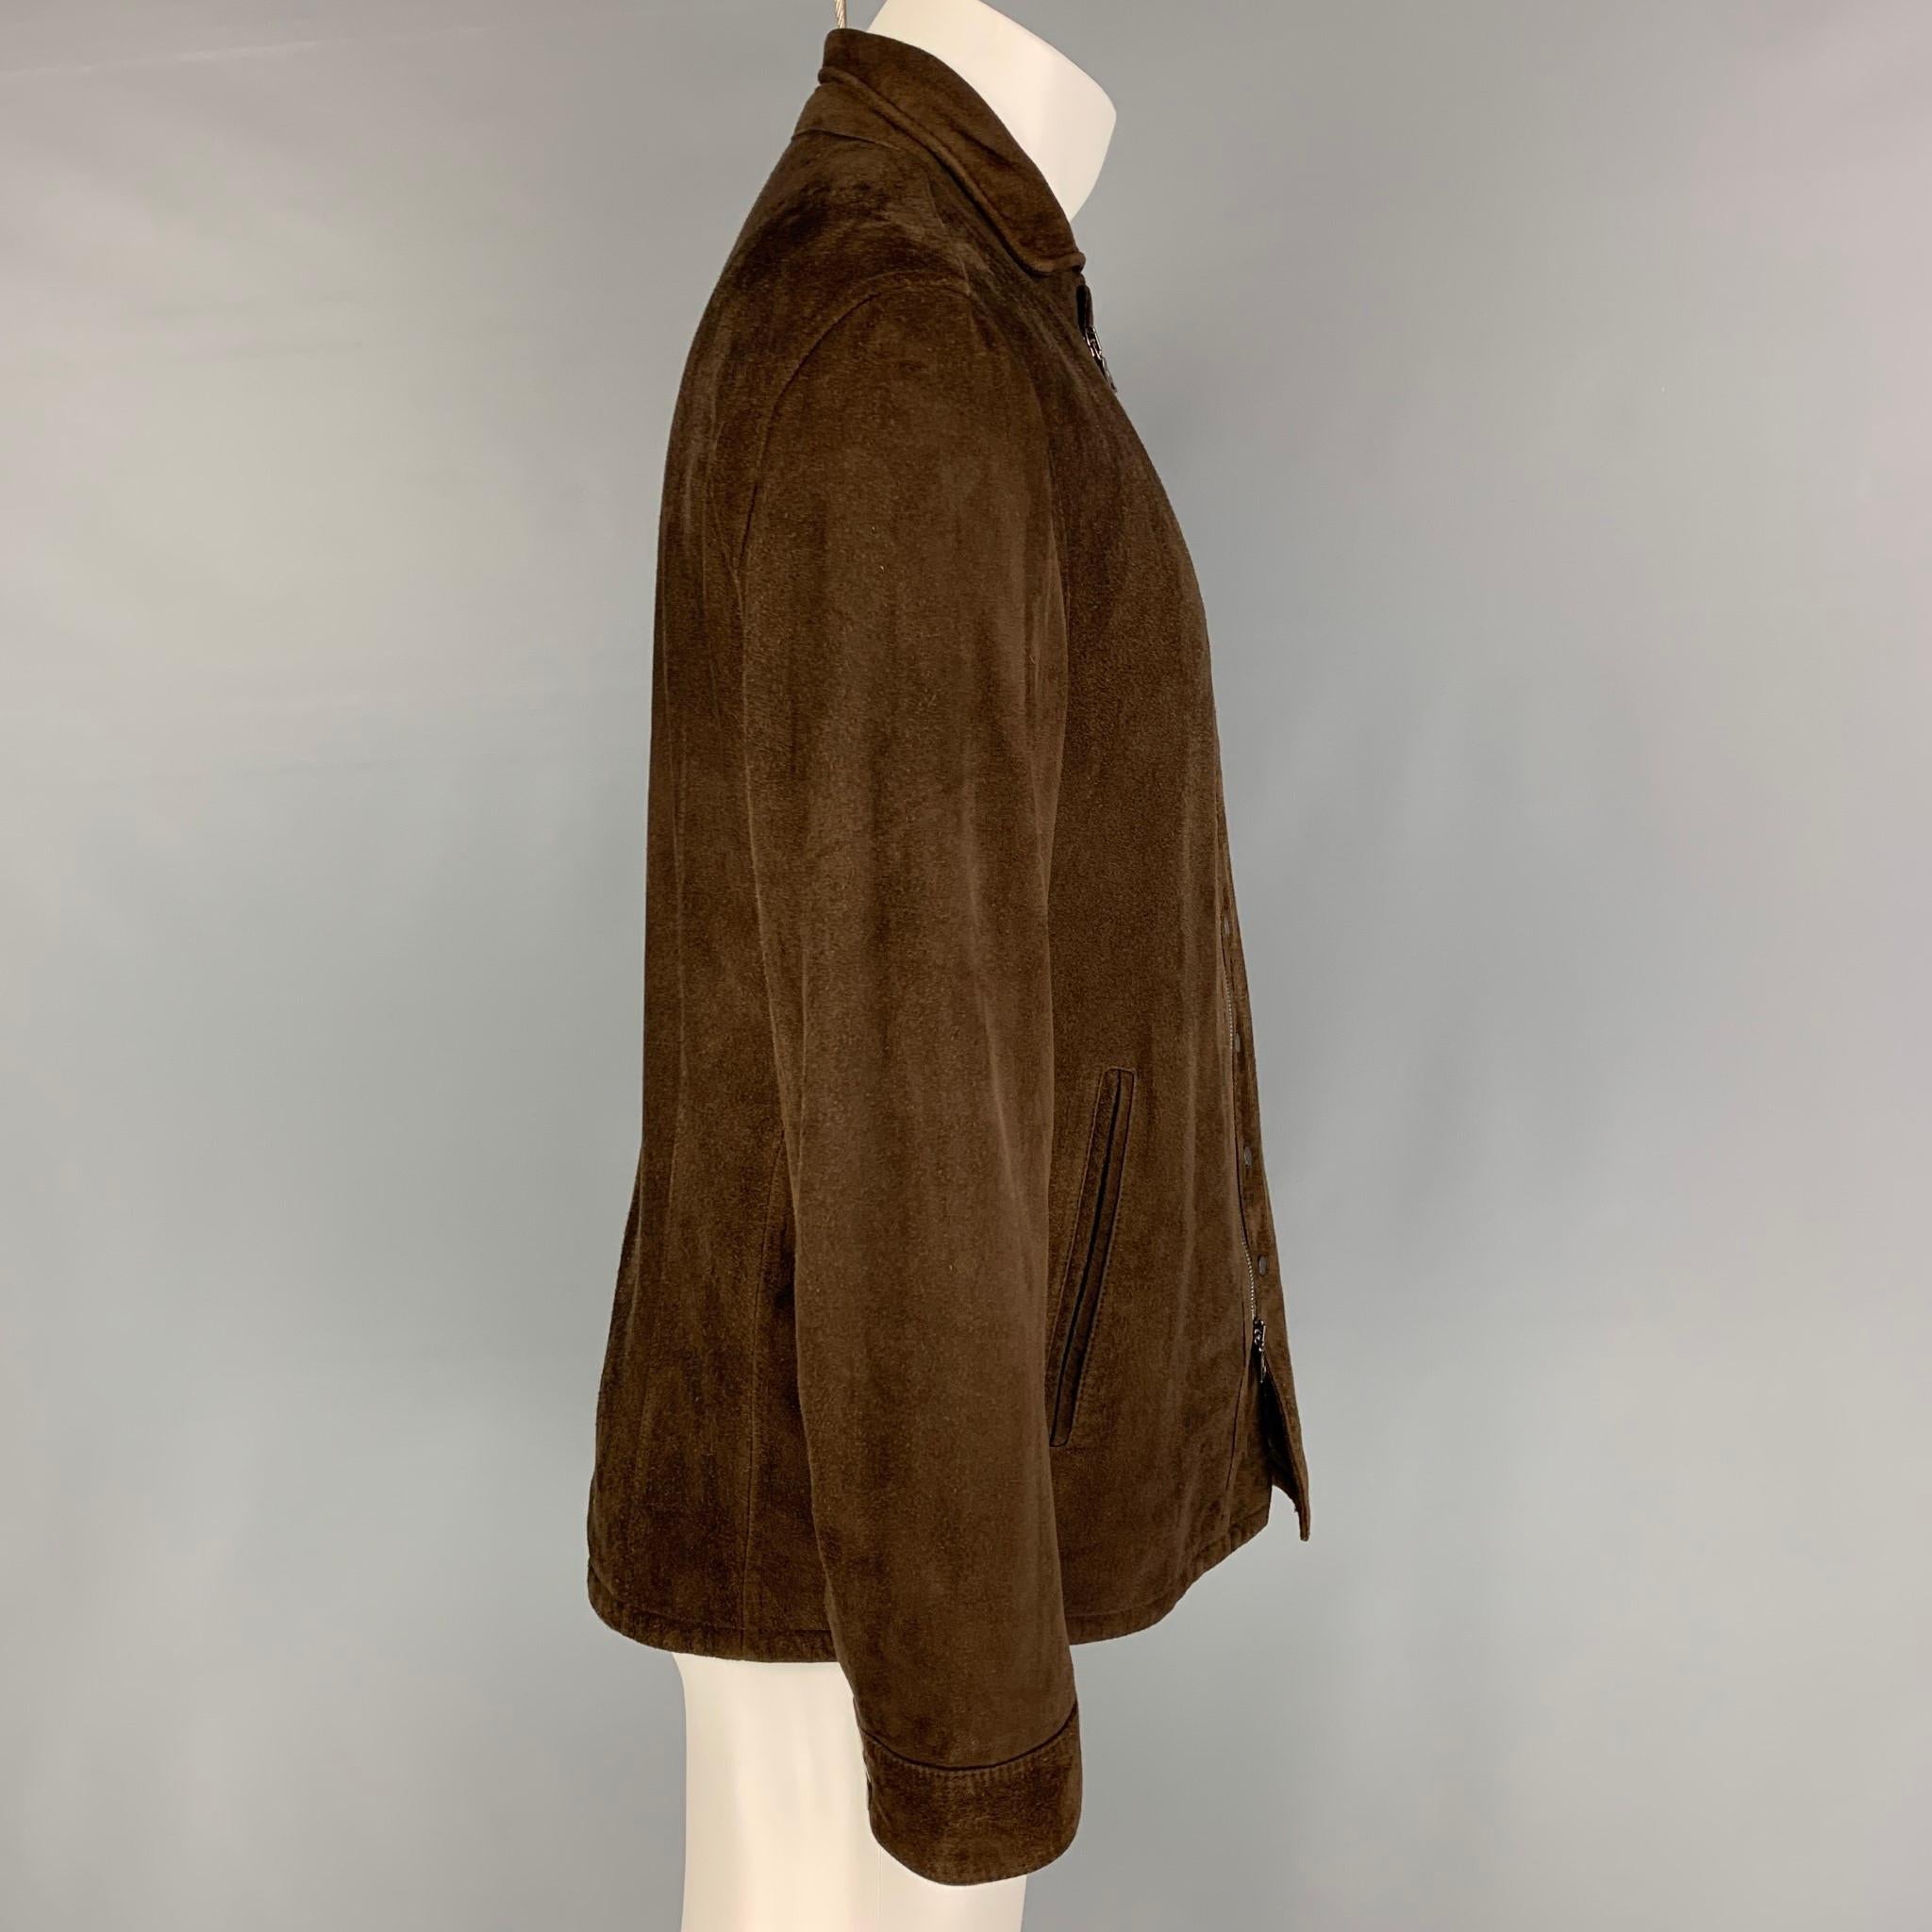 JOHN VARVATOS jacket comes in a brown suede featuring a small spread collar, front pockets, and a zip & snap button closure. 

Very Good Pre-Owned Condition.
Marked: 50
Original Retail Price: $1,998.00

Measurements:

Shoulder: 18 in.
Chest: 40